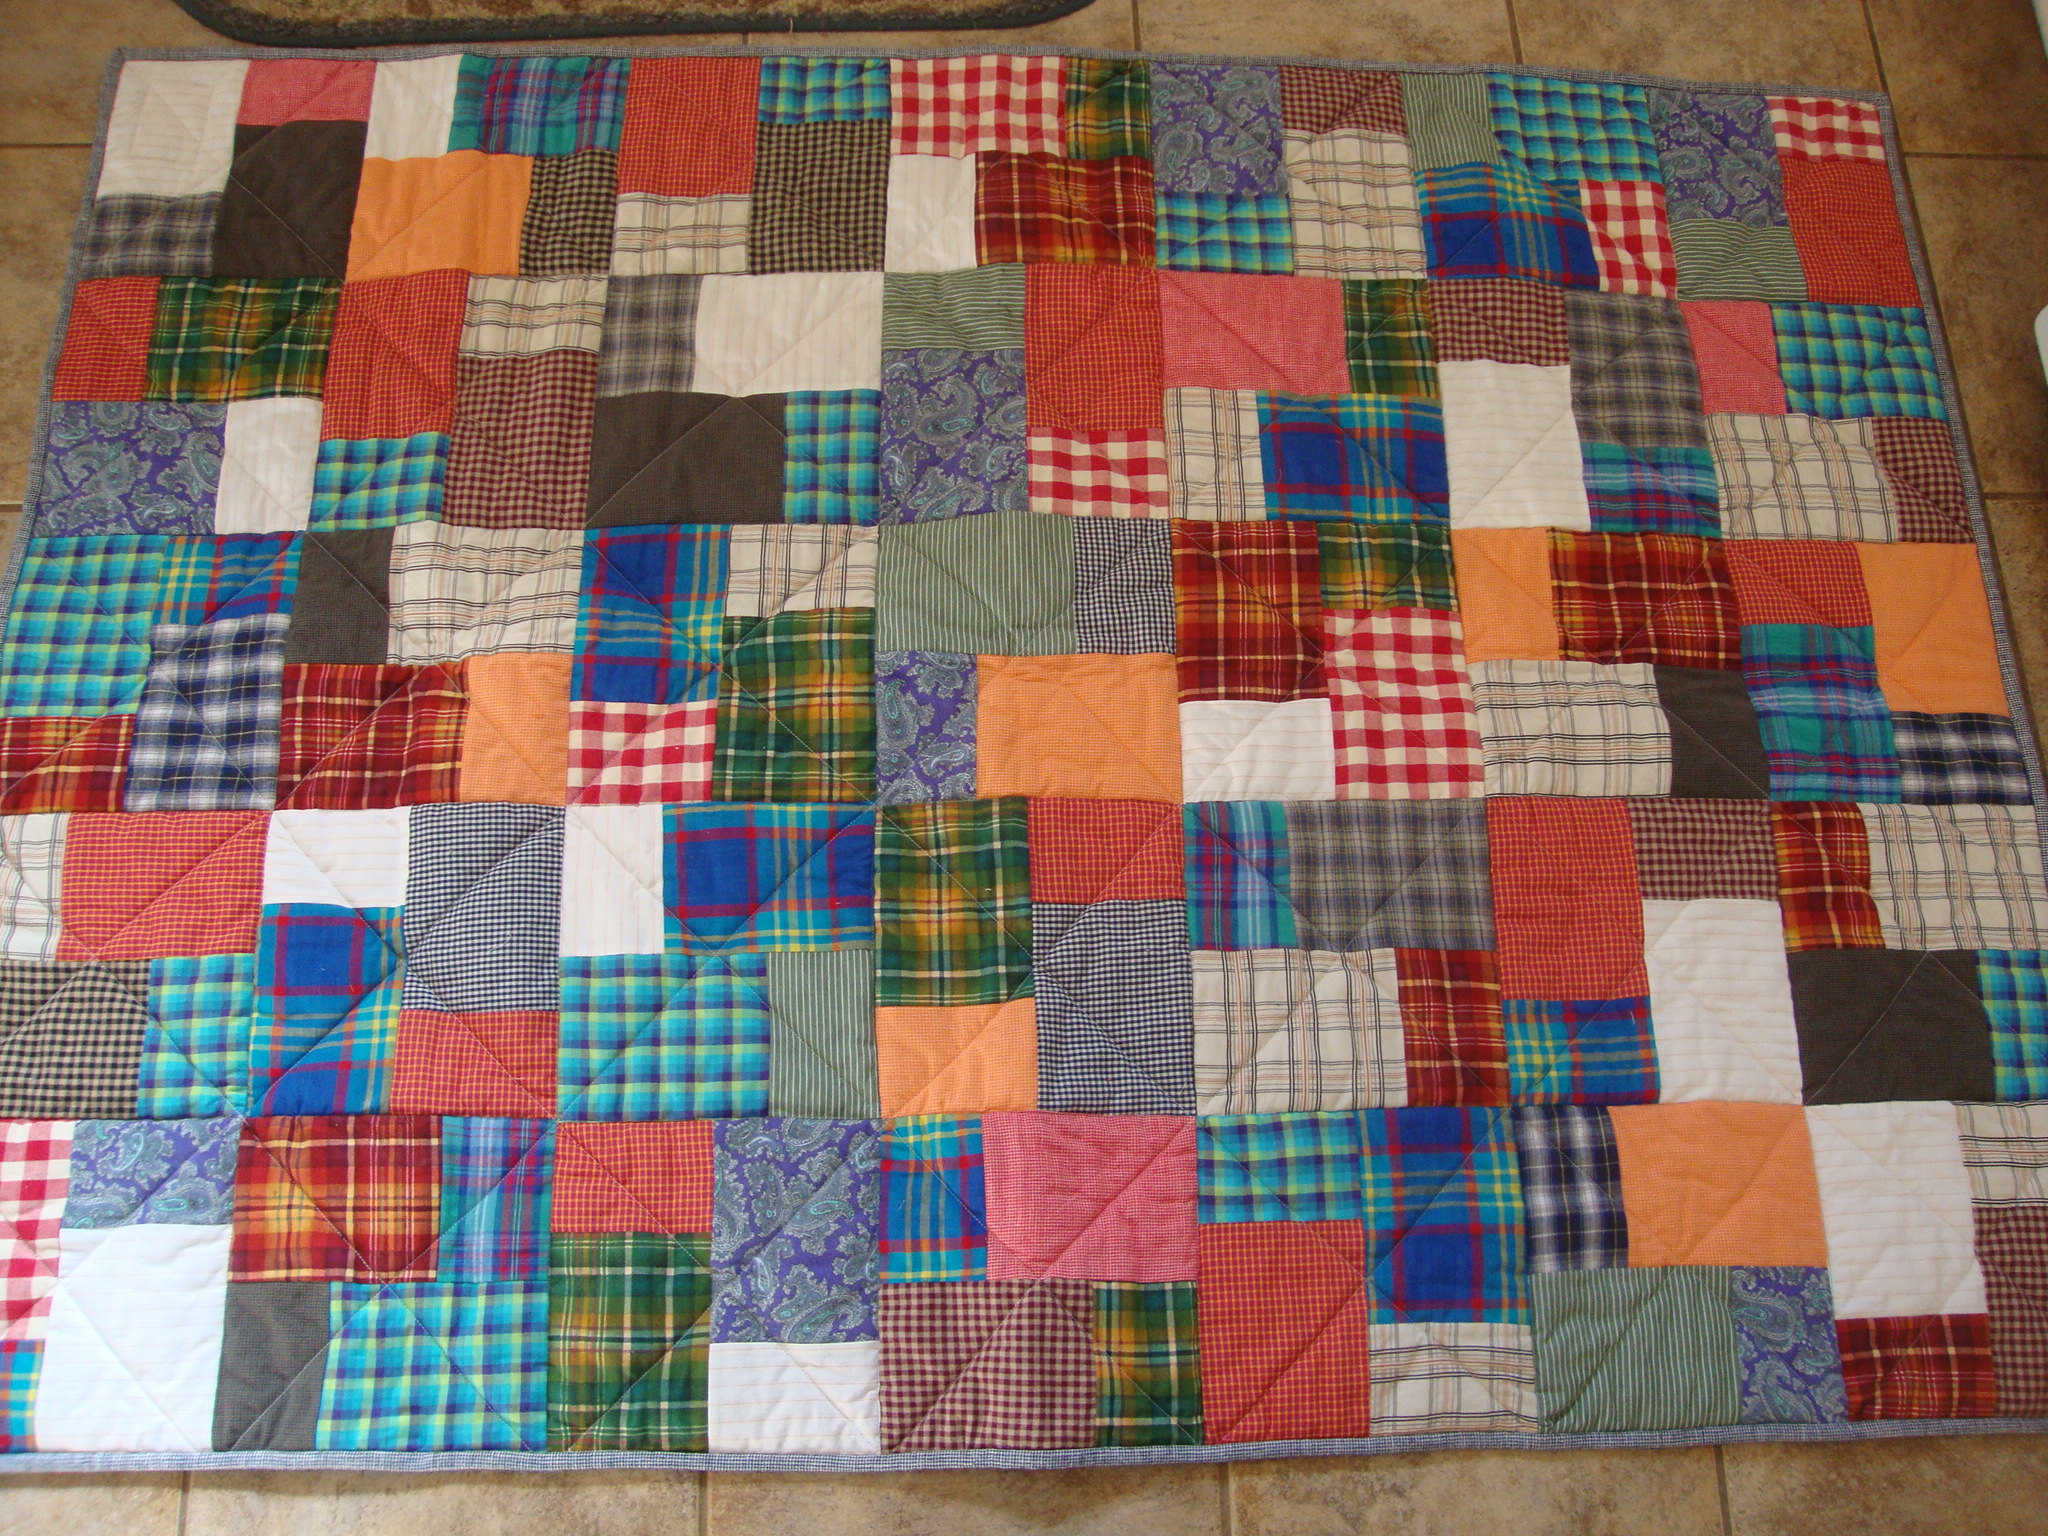 Cozy Utility Quilt to Donate - Quiltingboard Forums